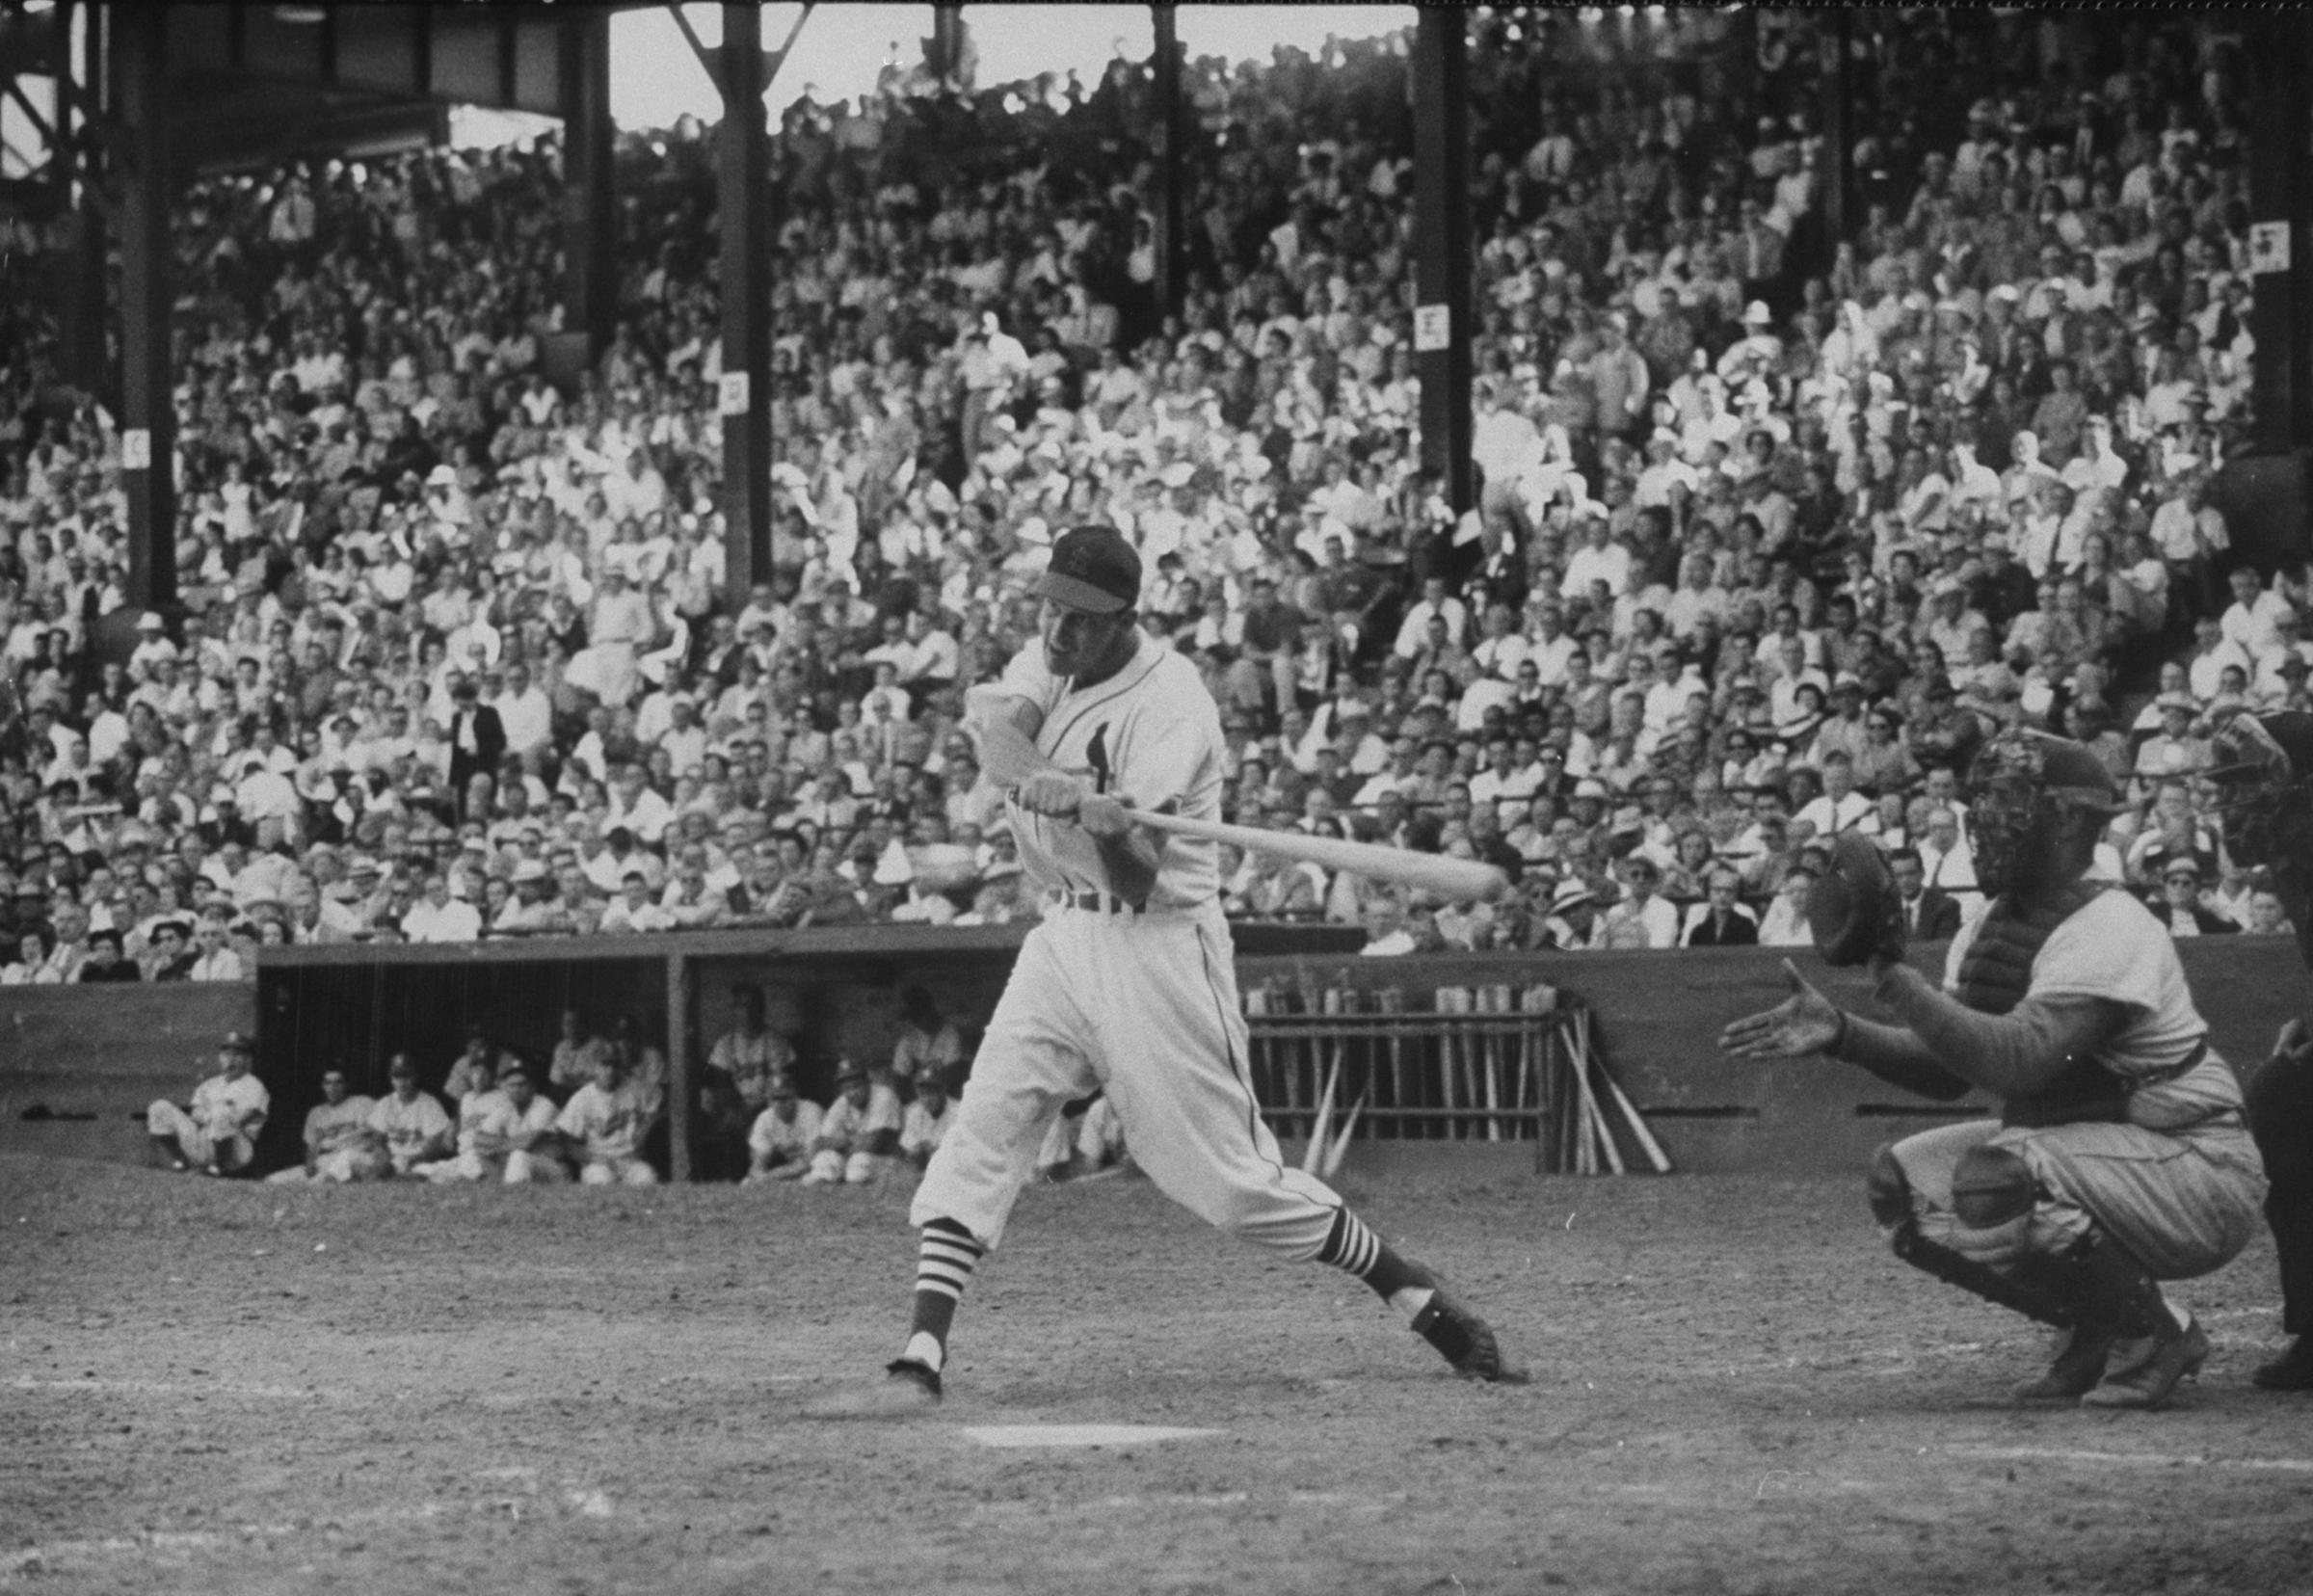 Stan Musial's compact, powerful swing, 1952.